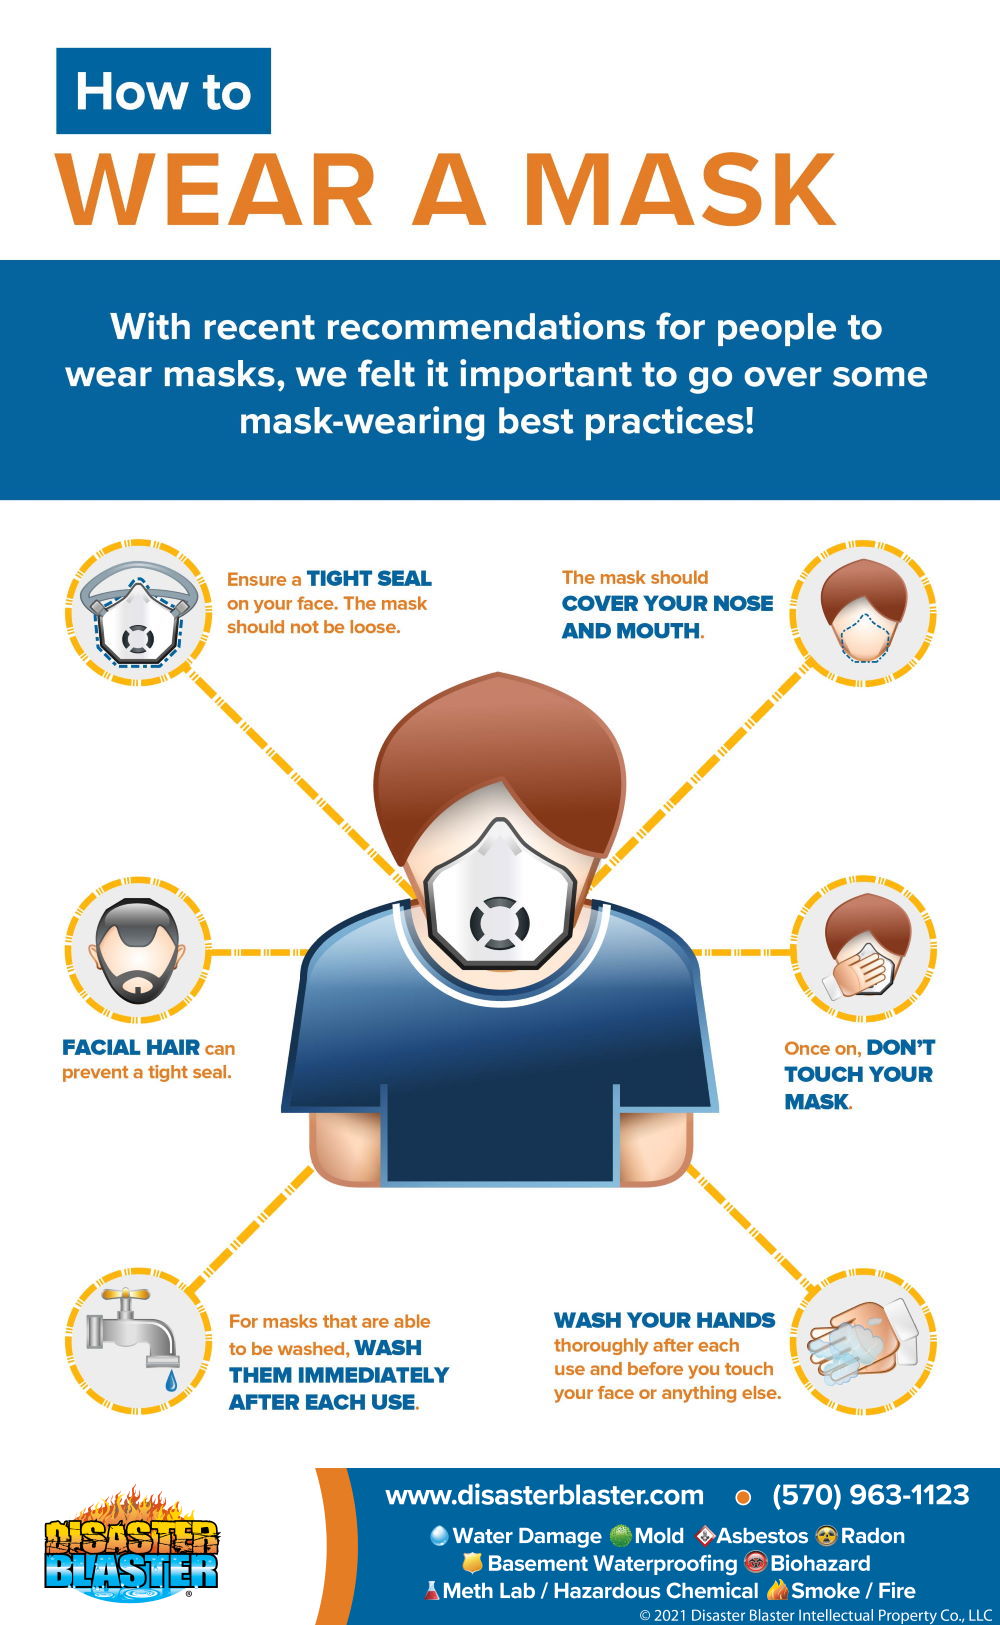 How to wear a mask to avoid Coronavirus Infographic